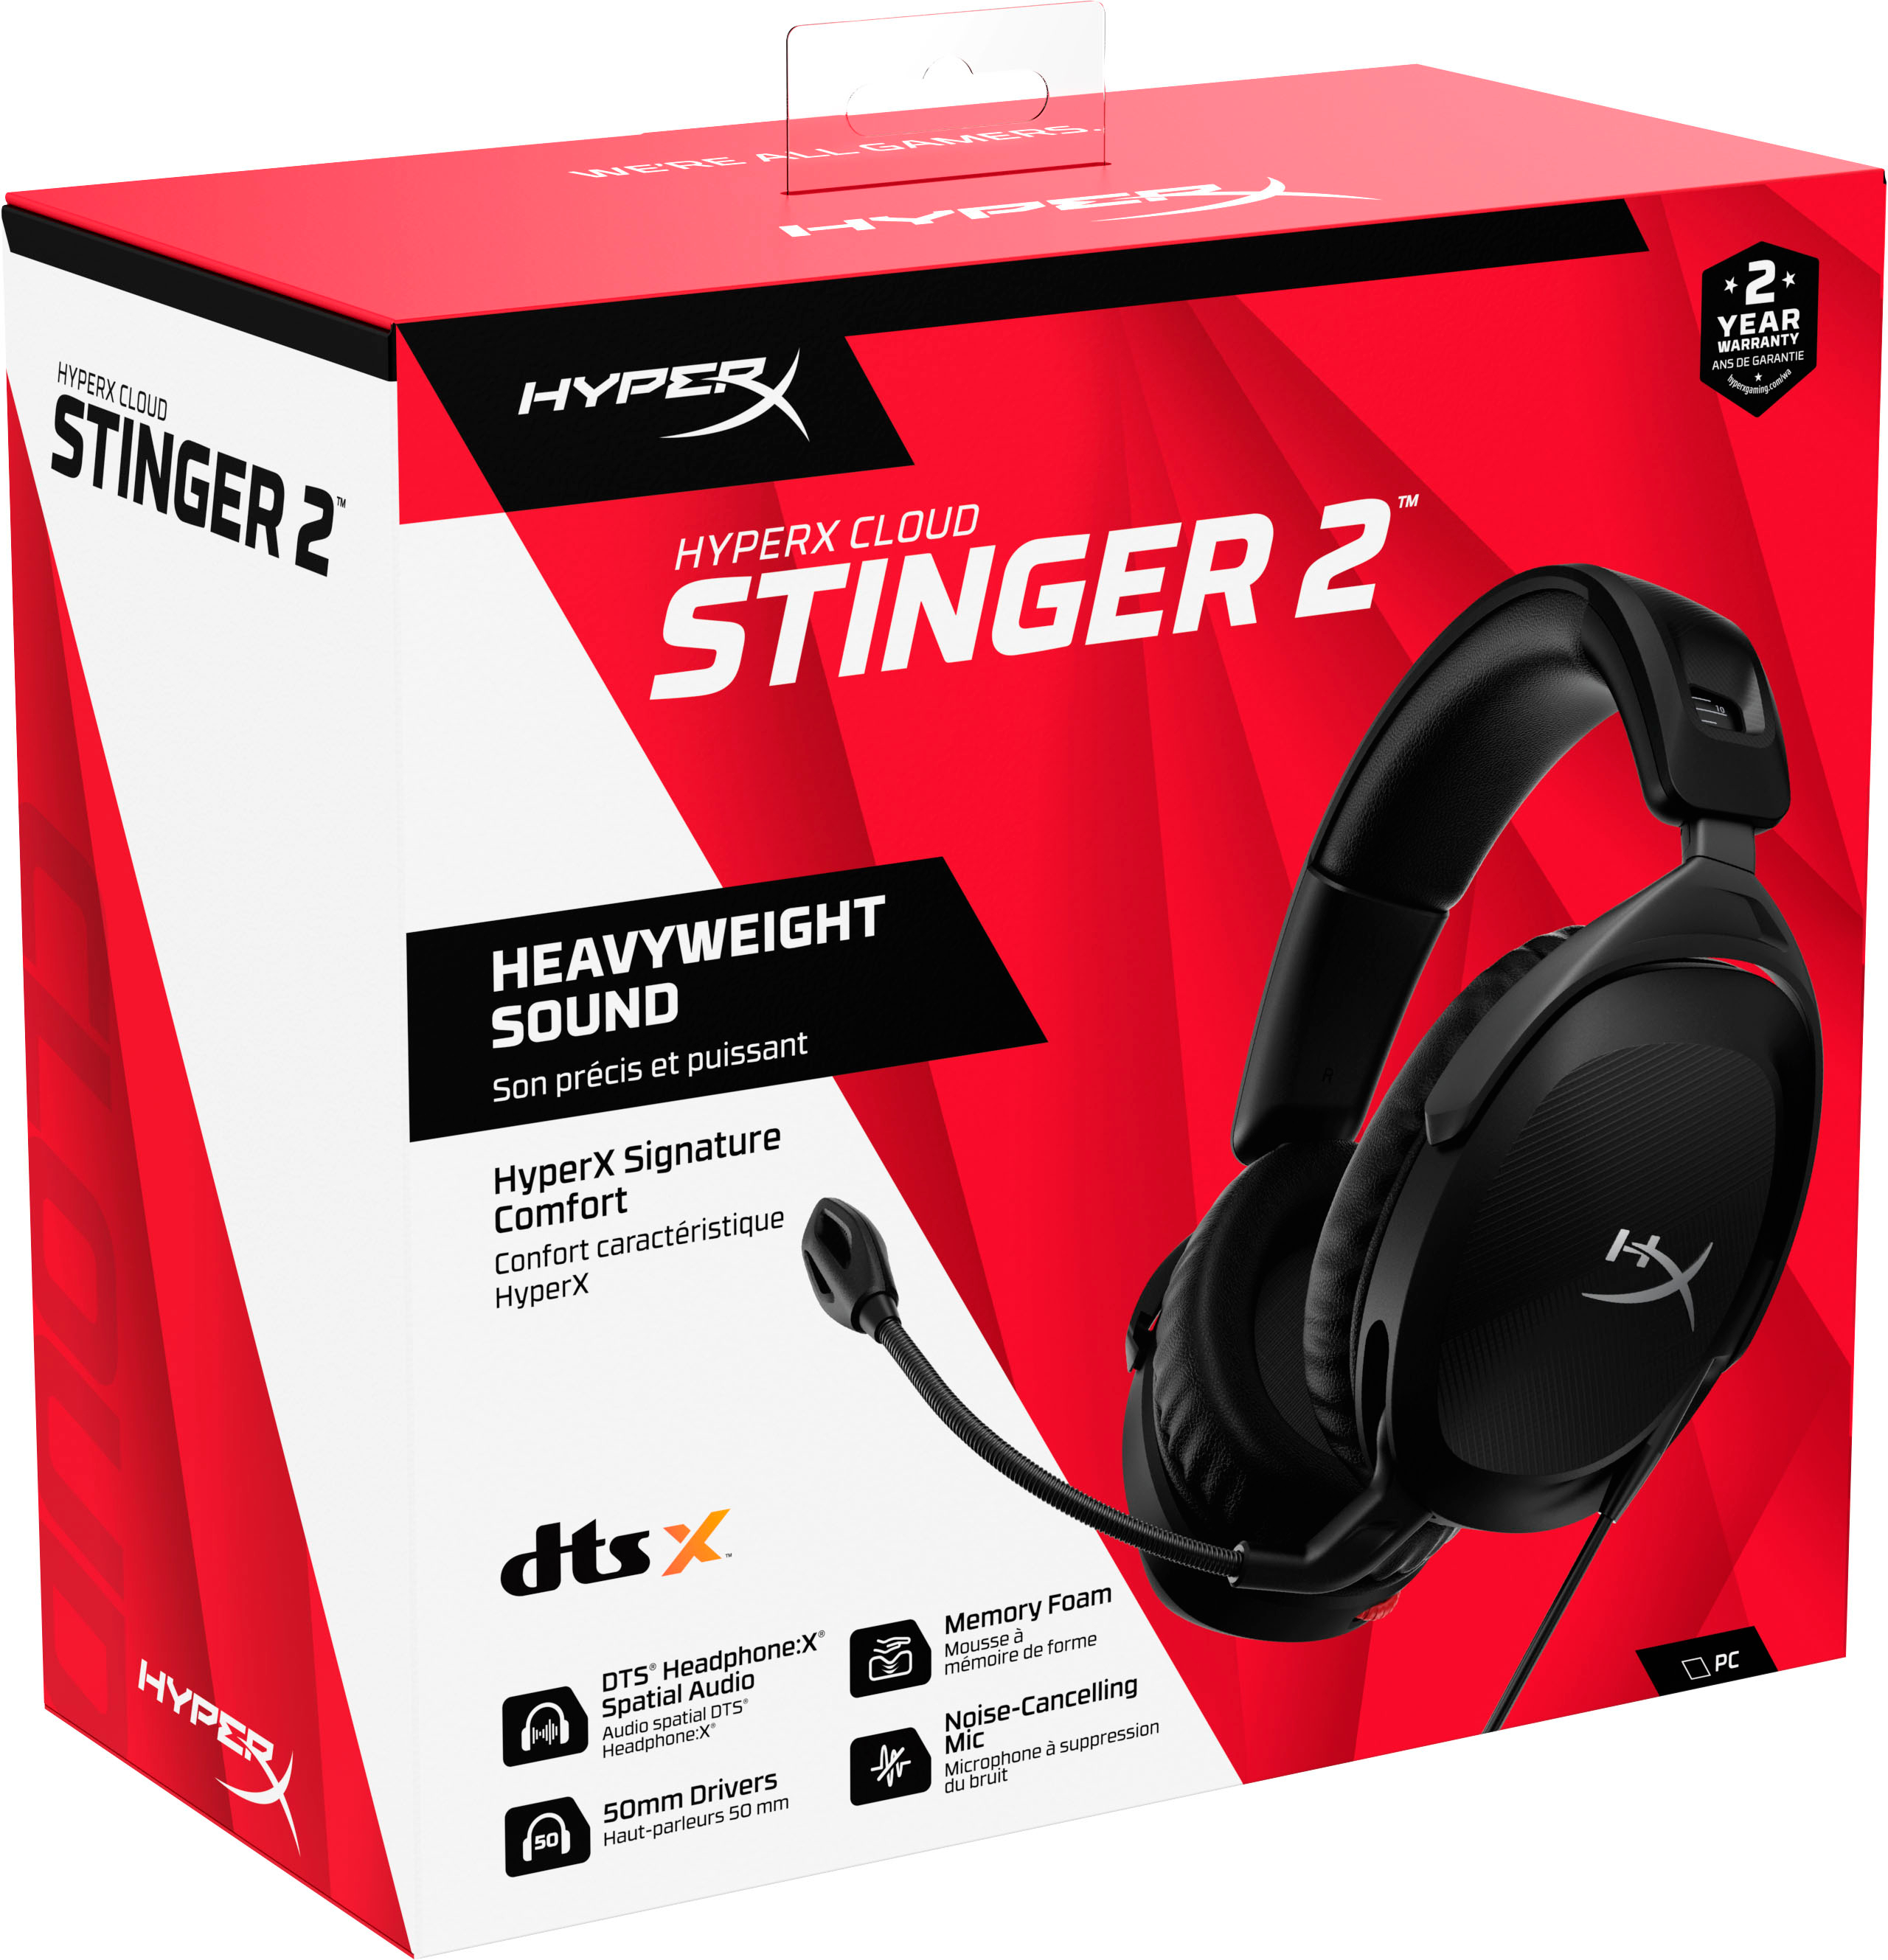 vrouw bijwoord salami HyperX Cloud Stinger 2 Wired DTS Headphone:X Gaming Headset for PC Black  519T1AA - Best Buy